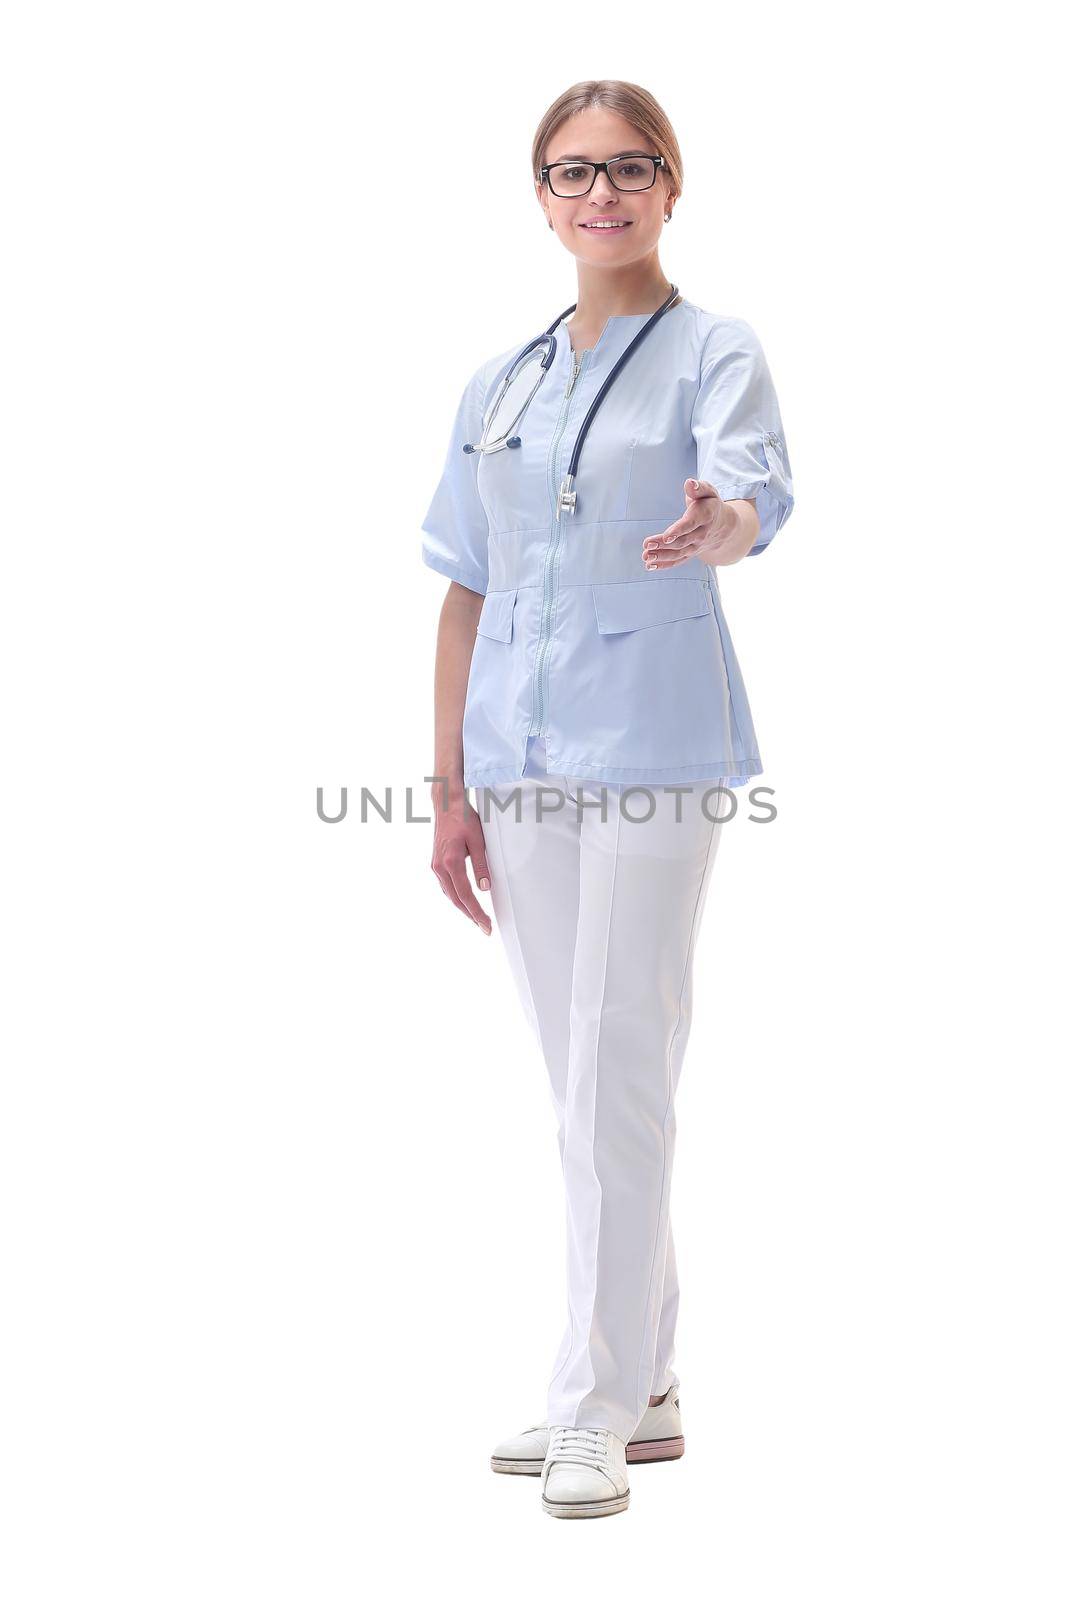 in full growth. friendly female doctor extending her hand for a handshake. isolated on white